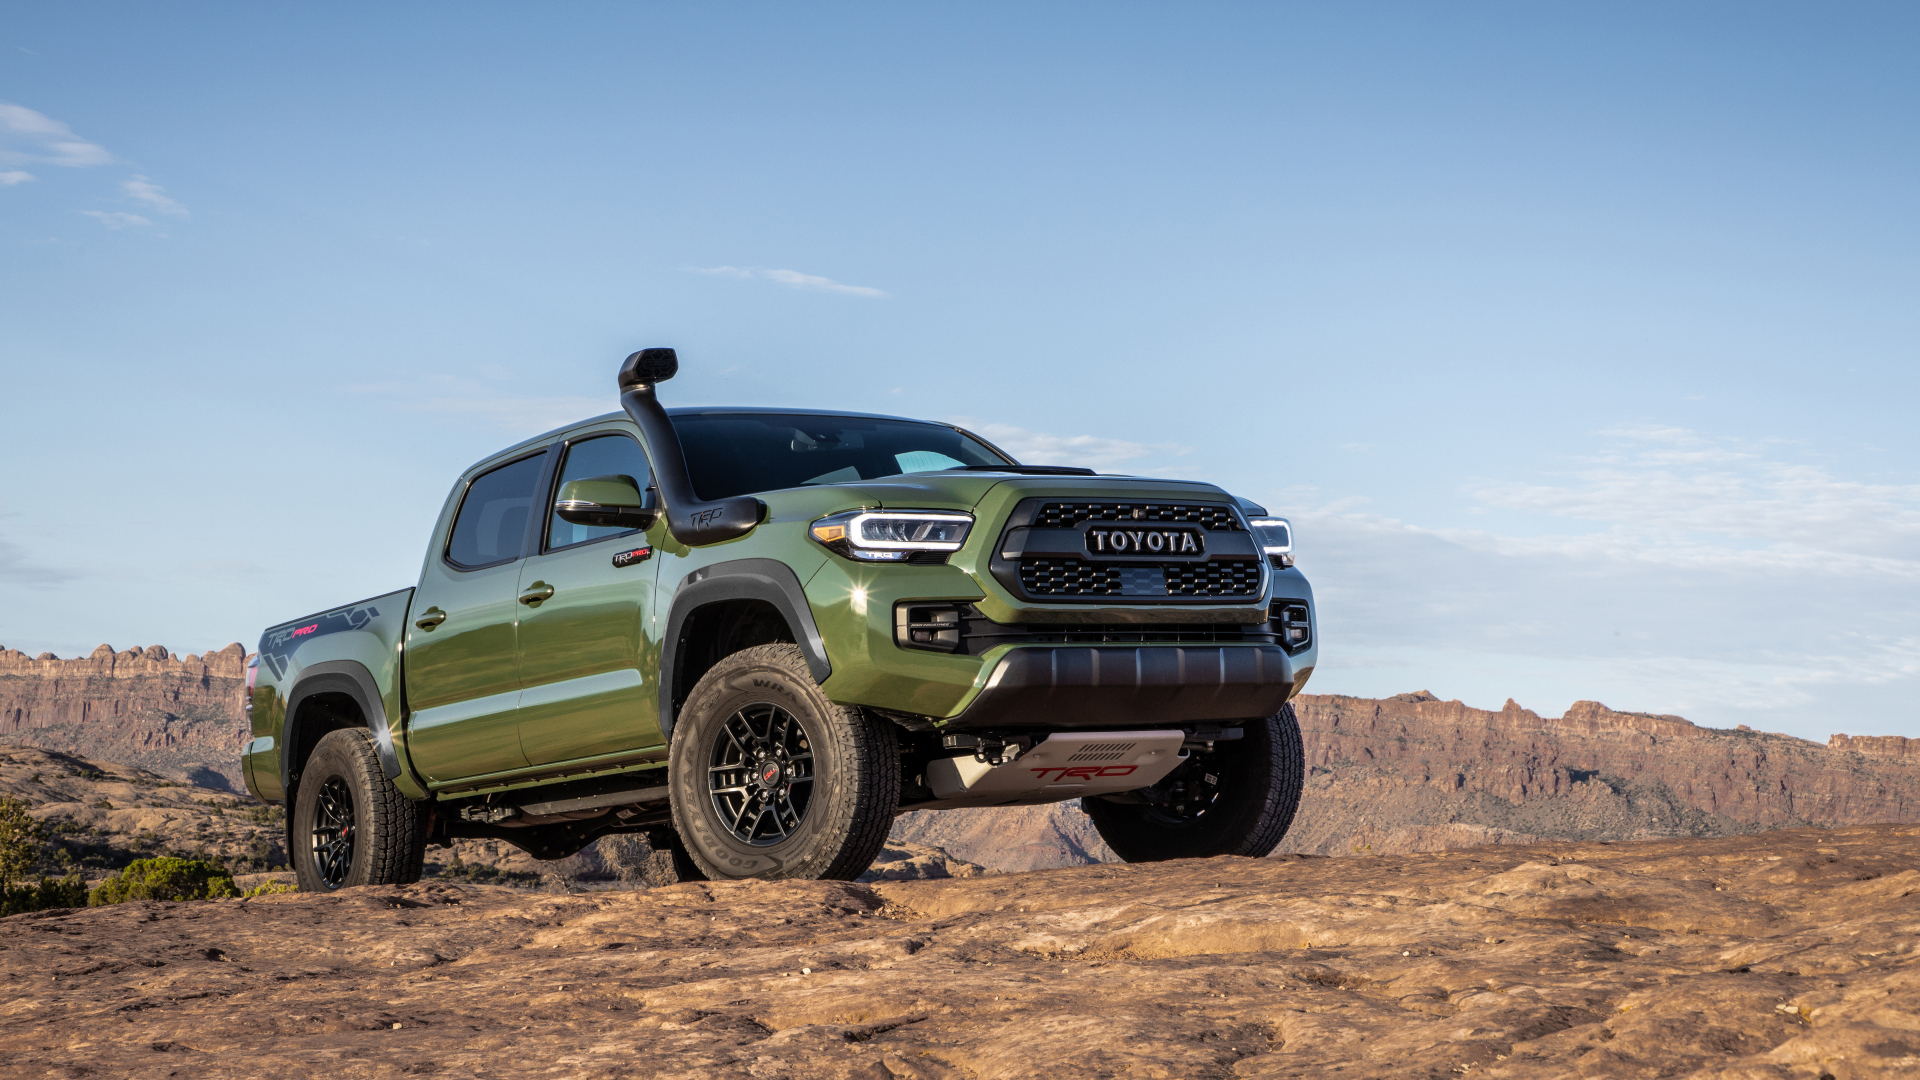 Toyota Tacoma TRD Pro 2020: free desktop wallpaper and background image